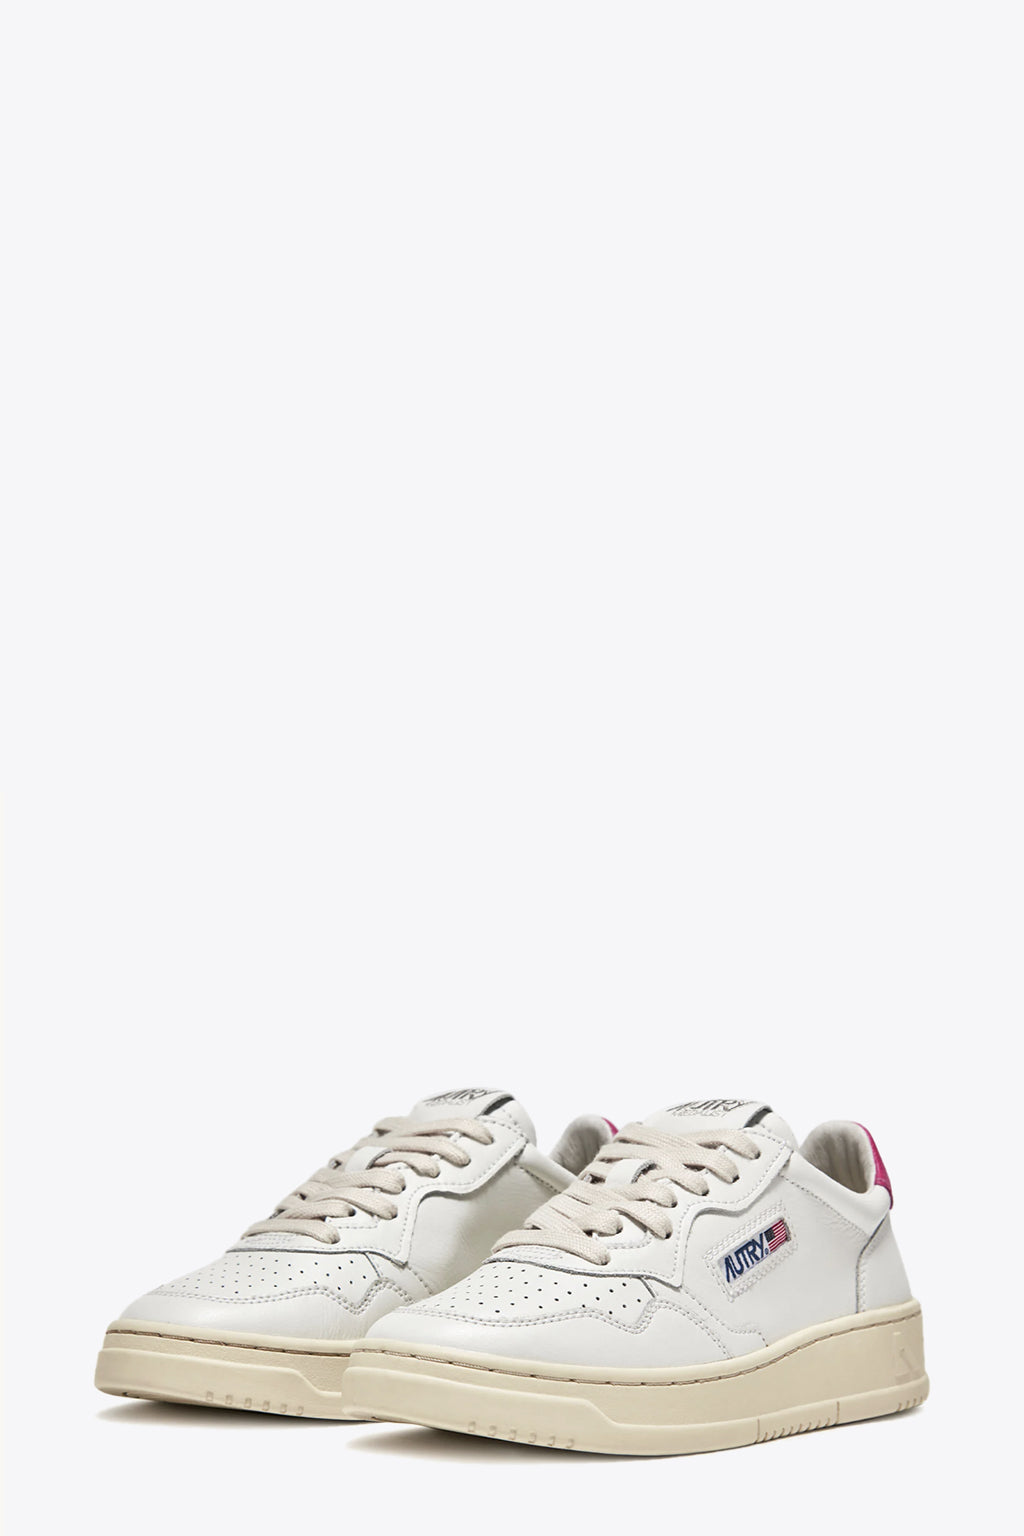 alt-image__White-leather-sneaker-with-fucsia-back-tab---Medalist